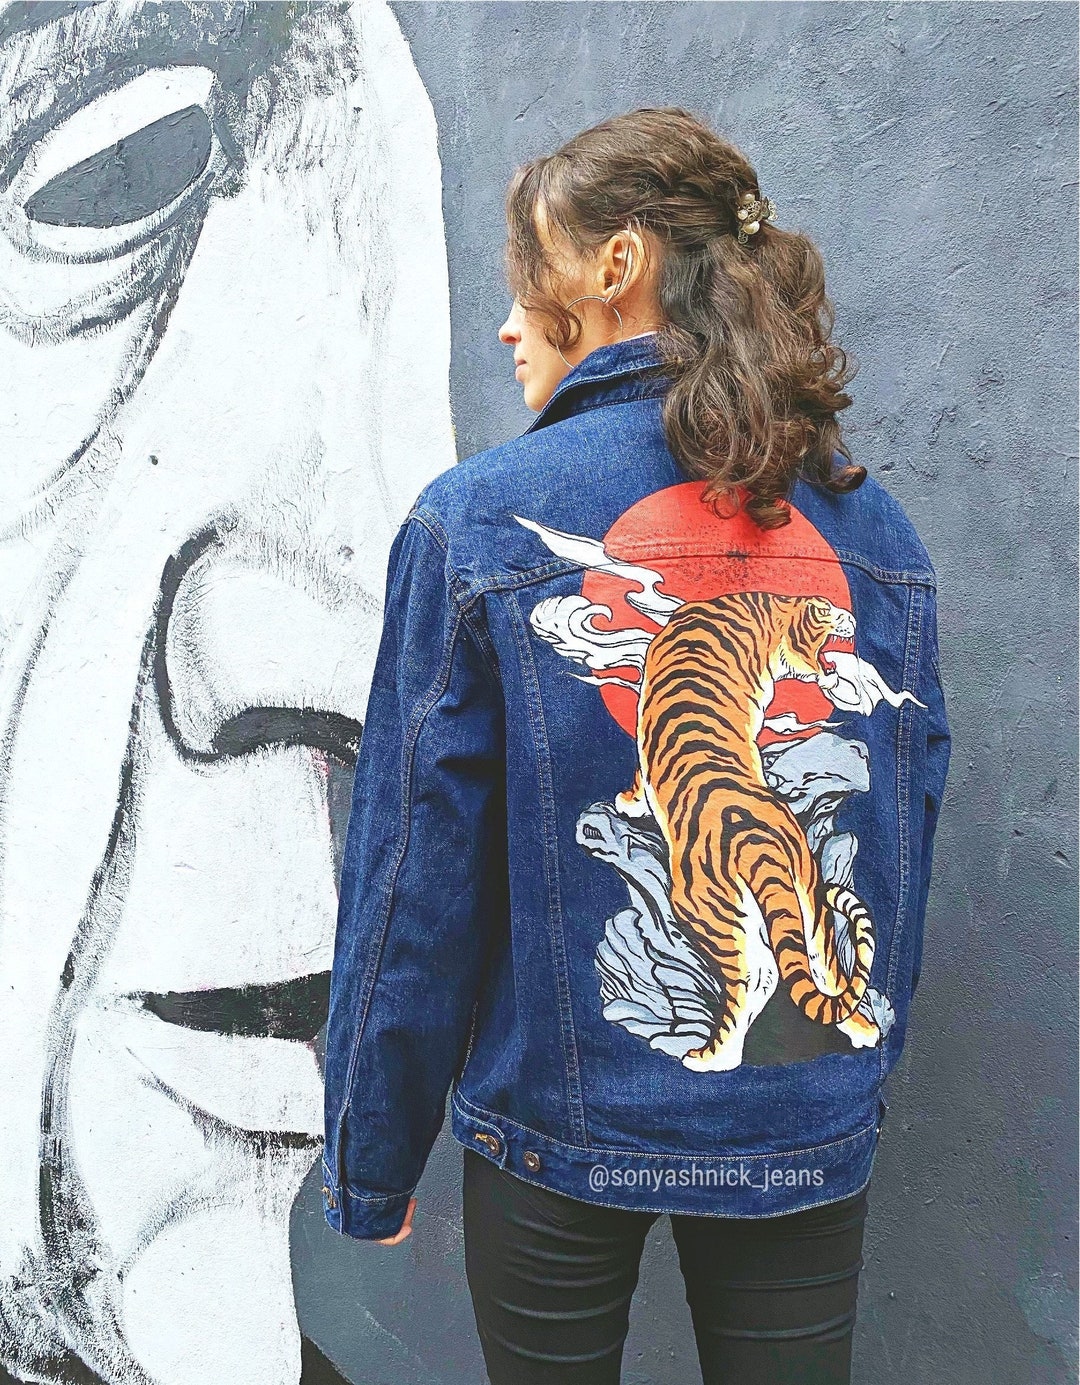 Jeans Jacket With Picture, Tiger Jacket - Etsy